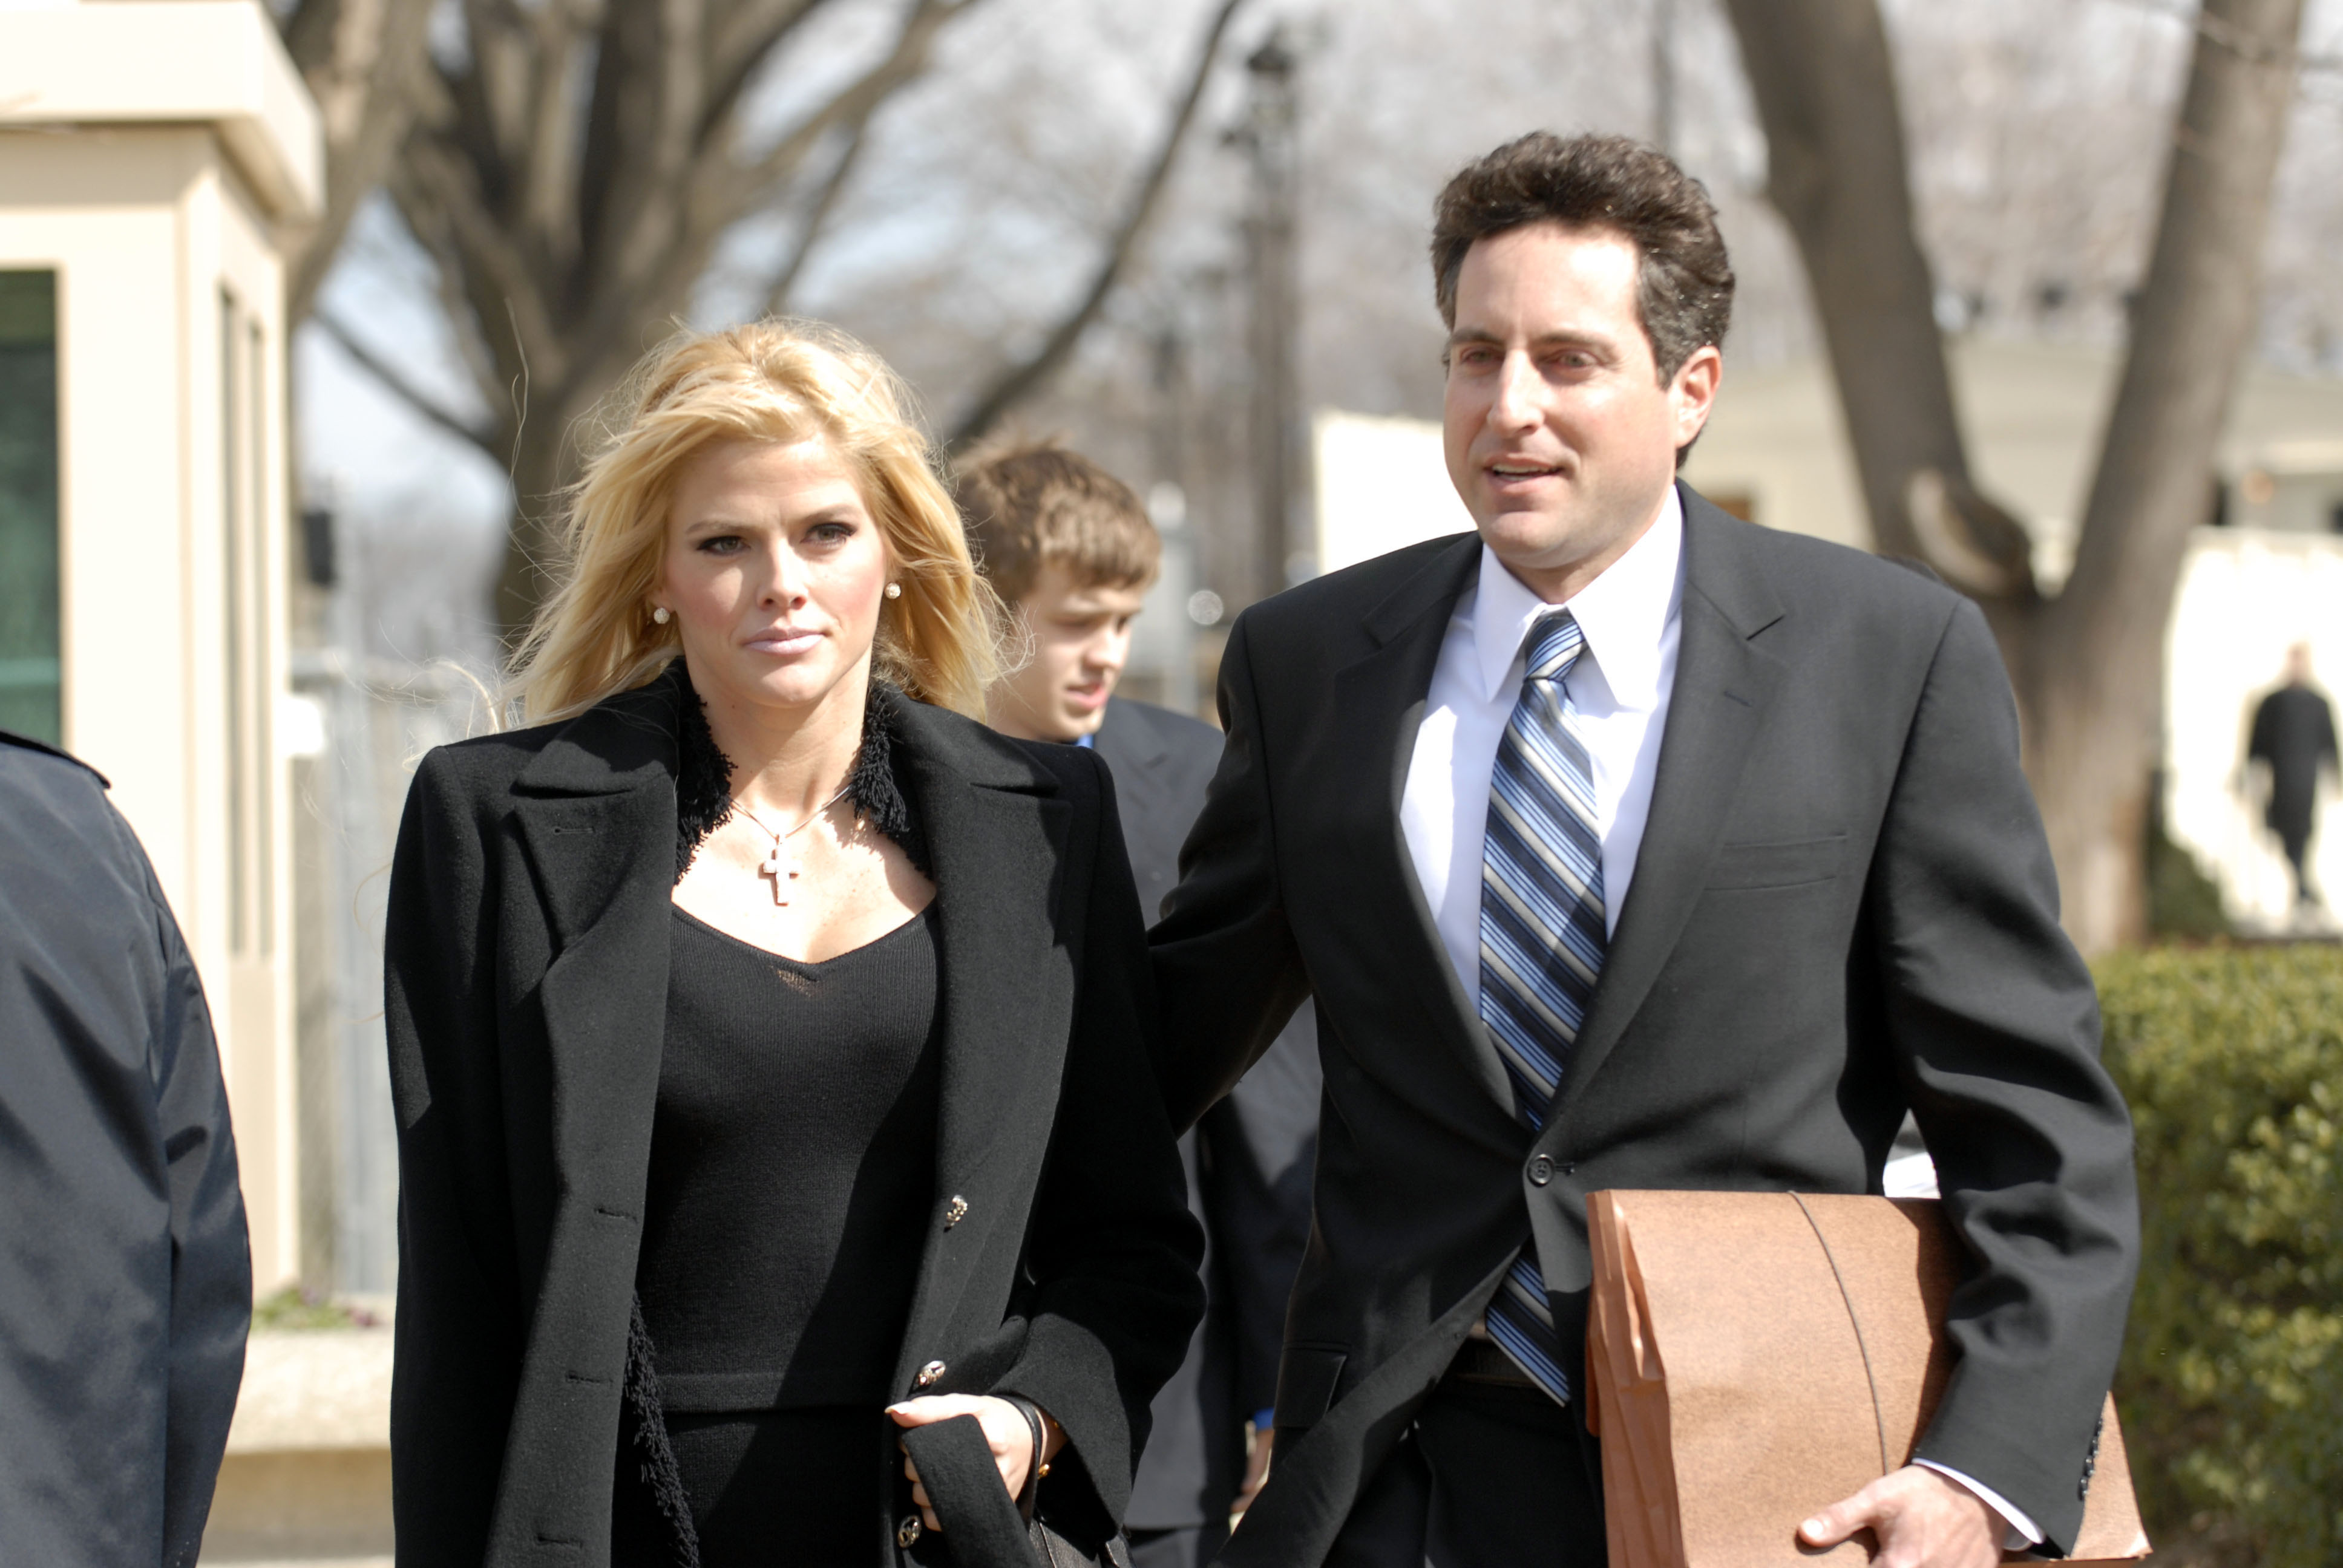 Anna Nicole Smith and Howard Stern at the US Supreme Court in Washington, DC on February 28, 2006 | Source: Getty Images